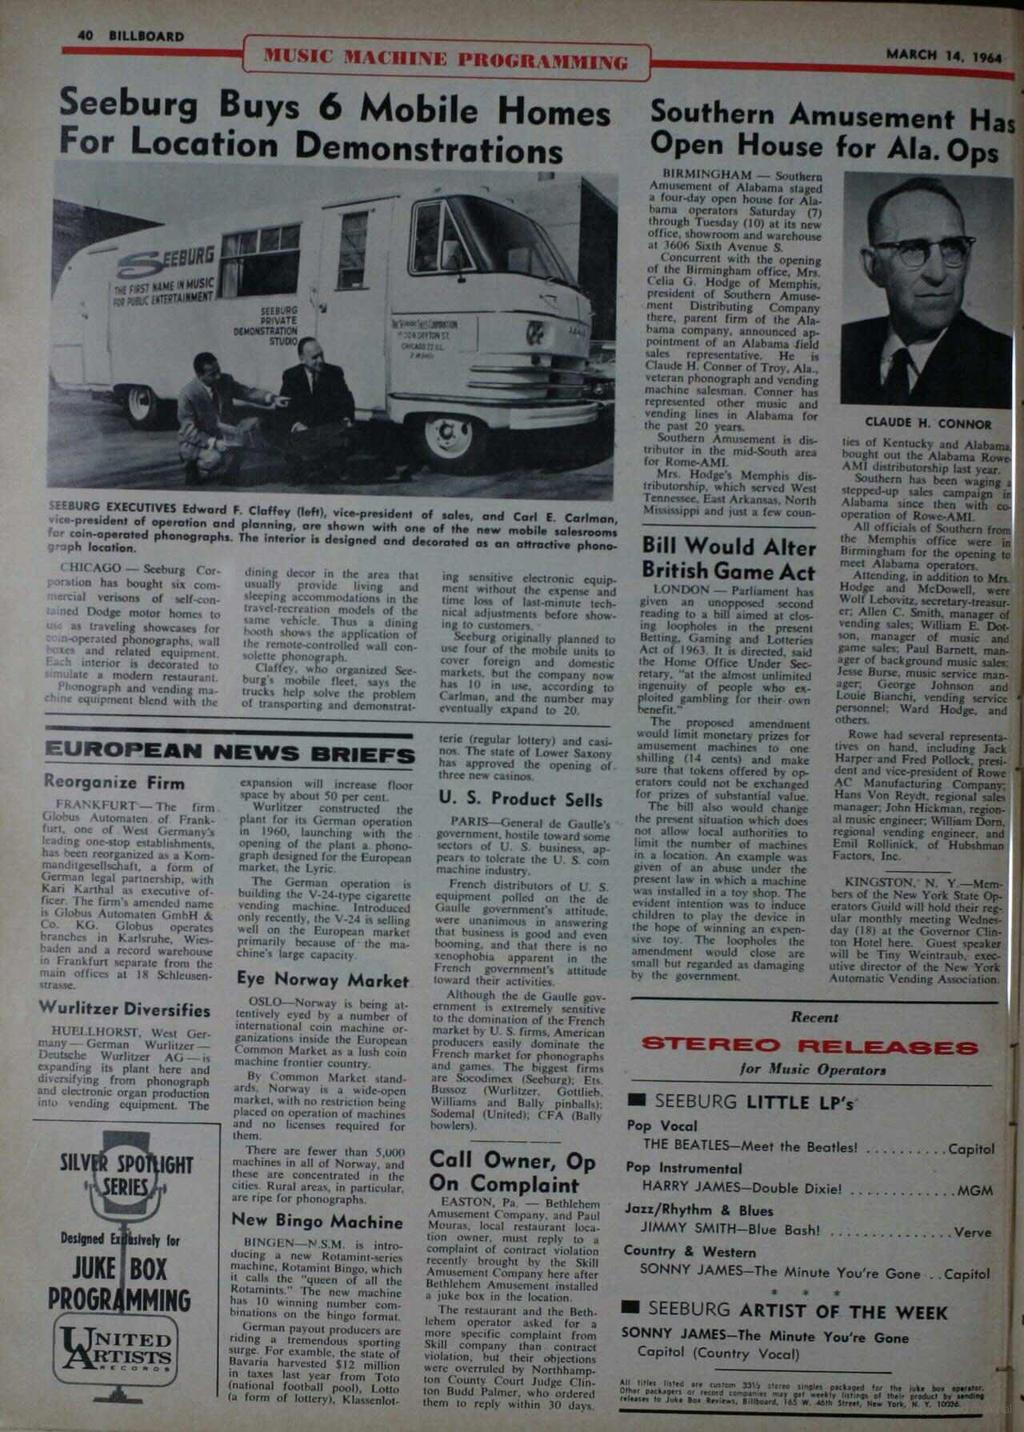 40 BILLBOARD MUSIC MACHINE PROGRAMMING i MARCH 14. 1964 Seeburg Buys 6 Mobile Homes For Location Demonstrations Southern Amusement Has Open House for Ala.